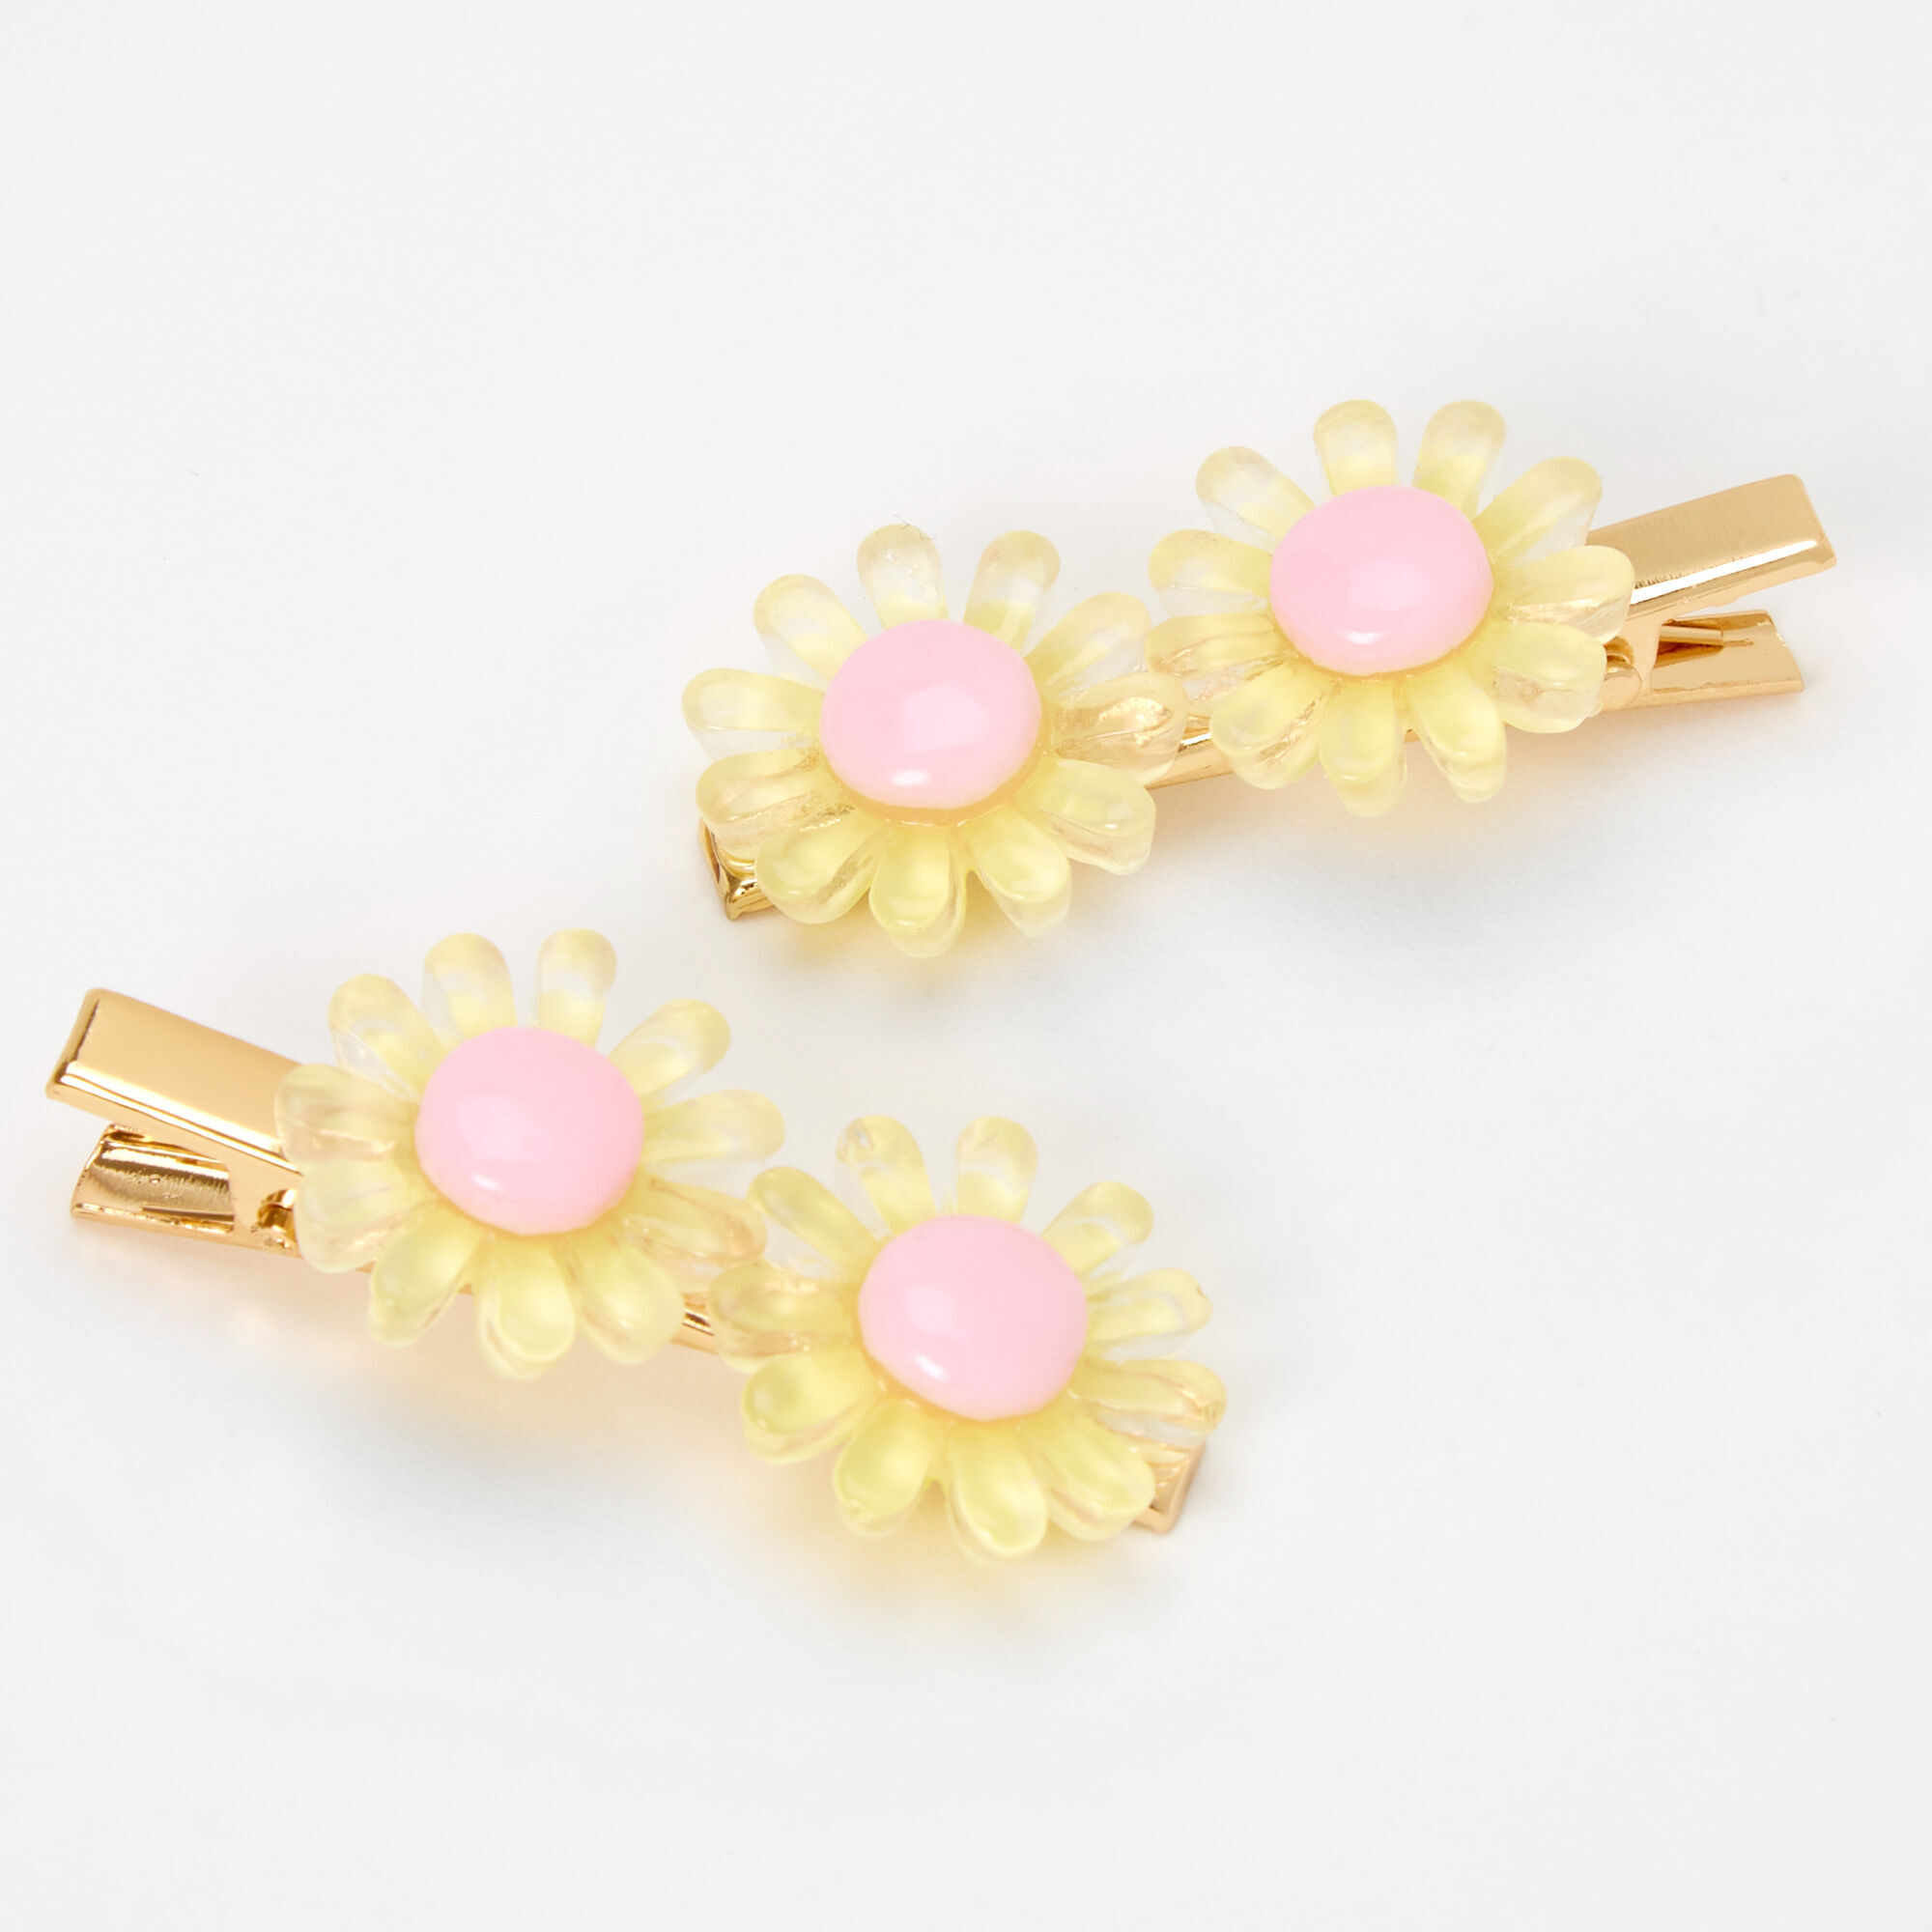 Yellow Daisy Flower Hair Clips - 2 Pack | Icing US